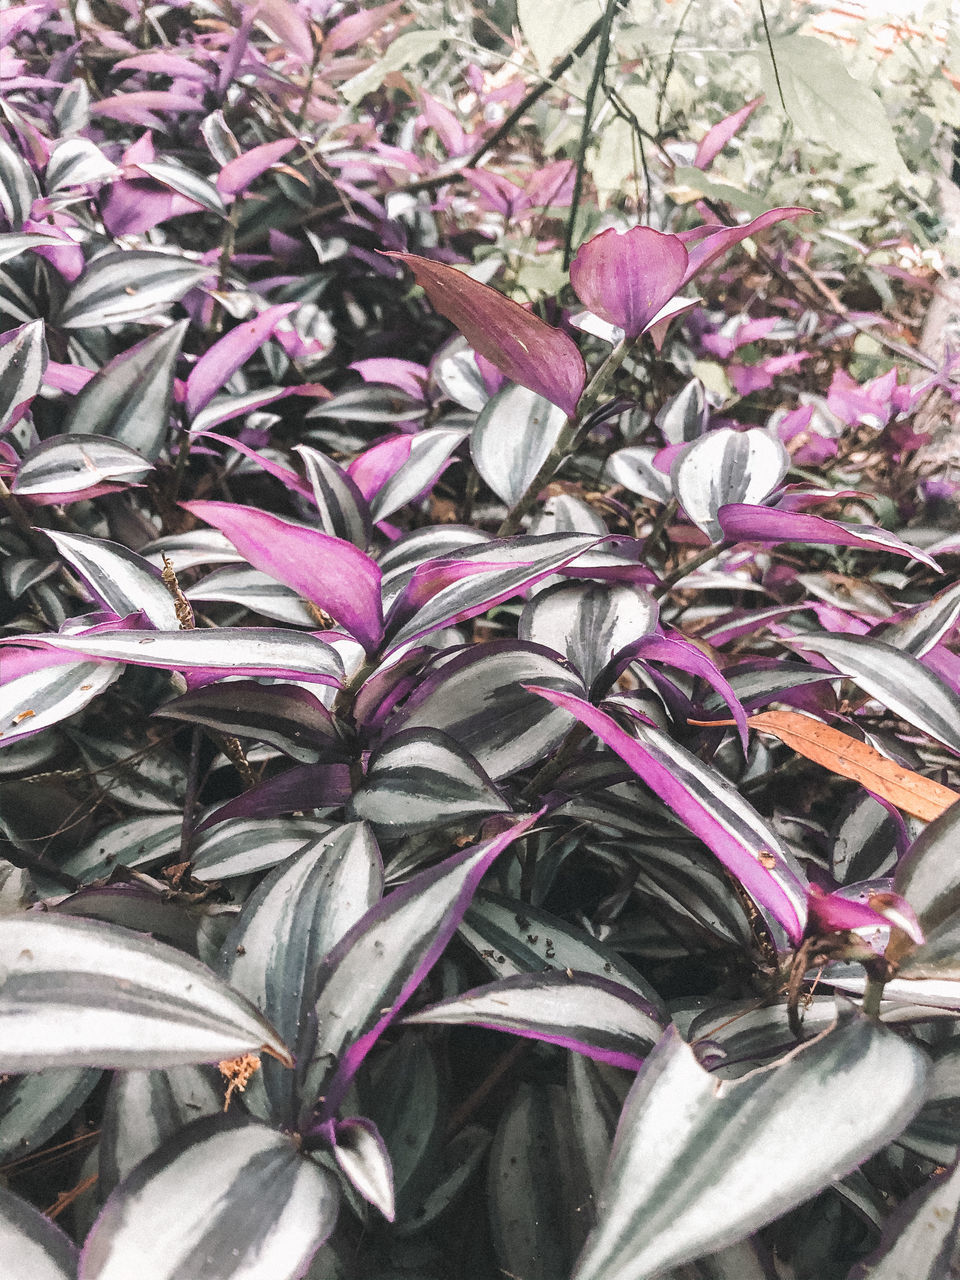 backgrounds, full frame, no people, close-up, plant, day, abundance, nature, plant part, large group of objects, leaf, high angle view, beauty in nature, outdoors, freshness, still life, purple, growth, metal, pink color, silver colored